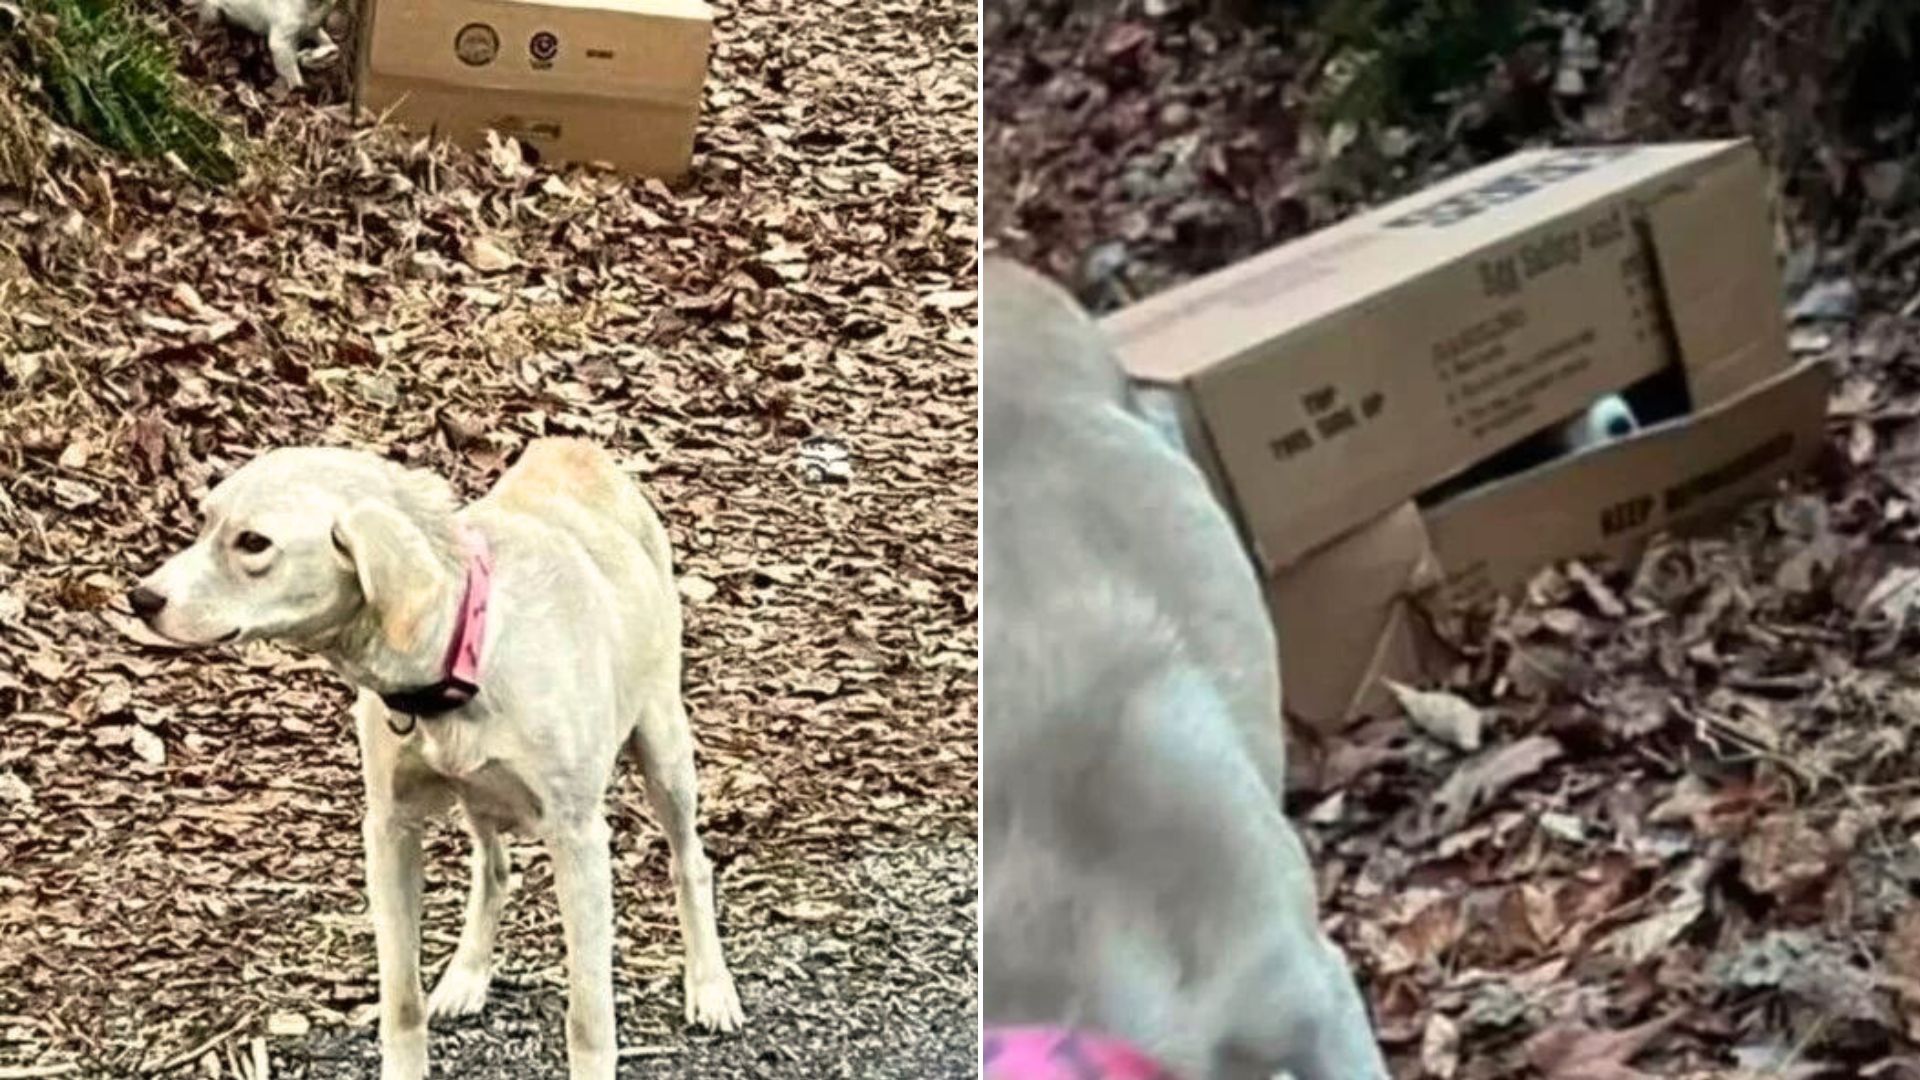 Man Sees An Abandoned Skinny Dog Fiercely Guarding A Cardboard Box Next To The Road